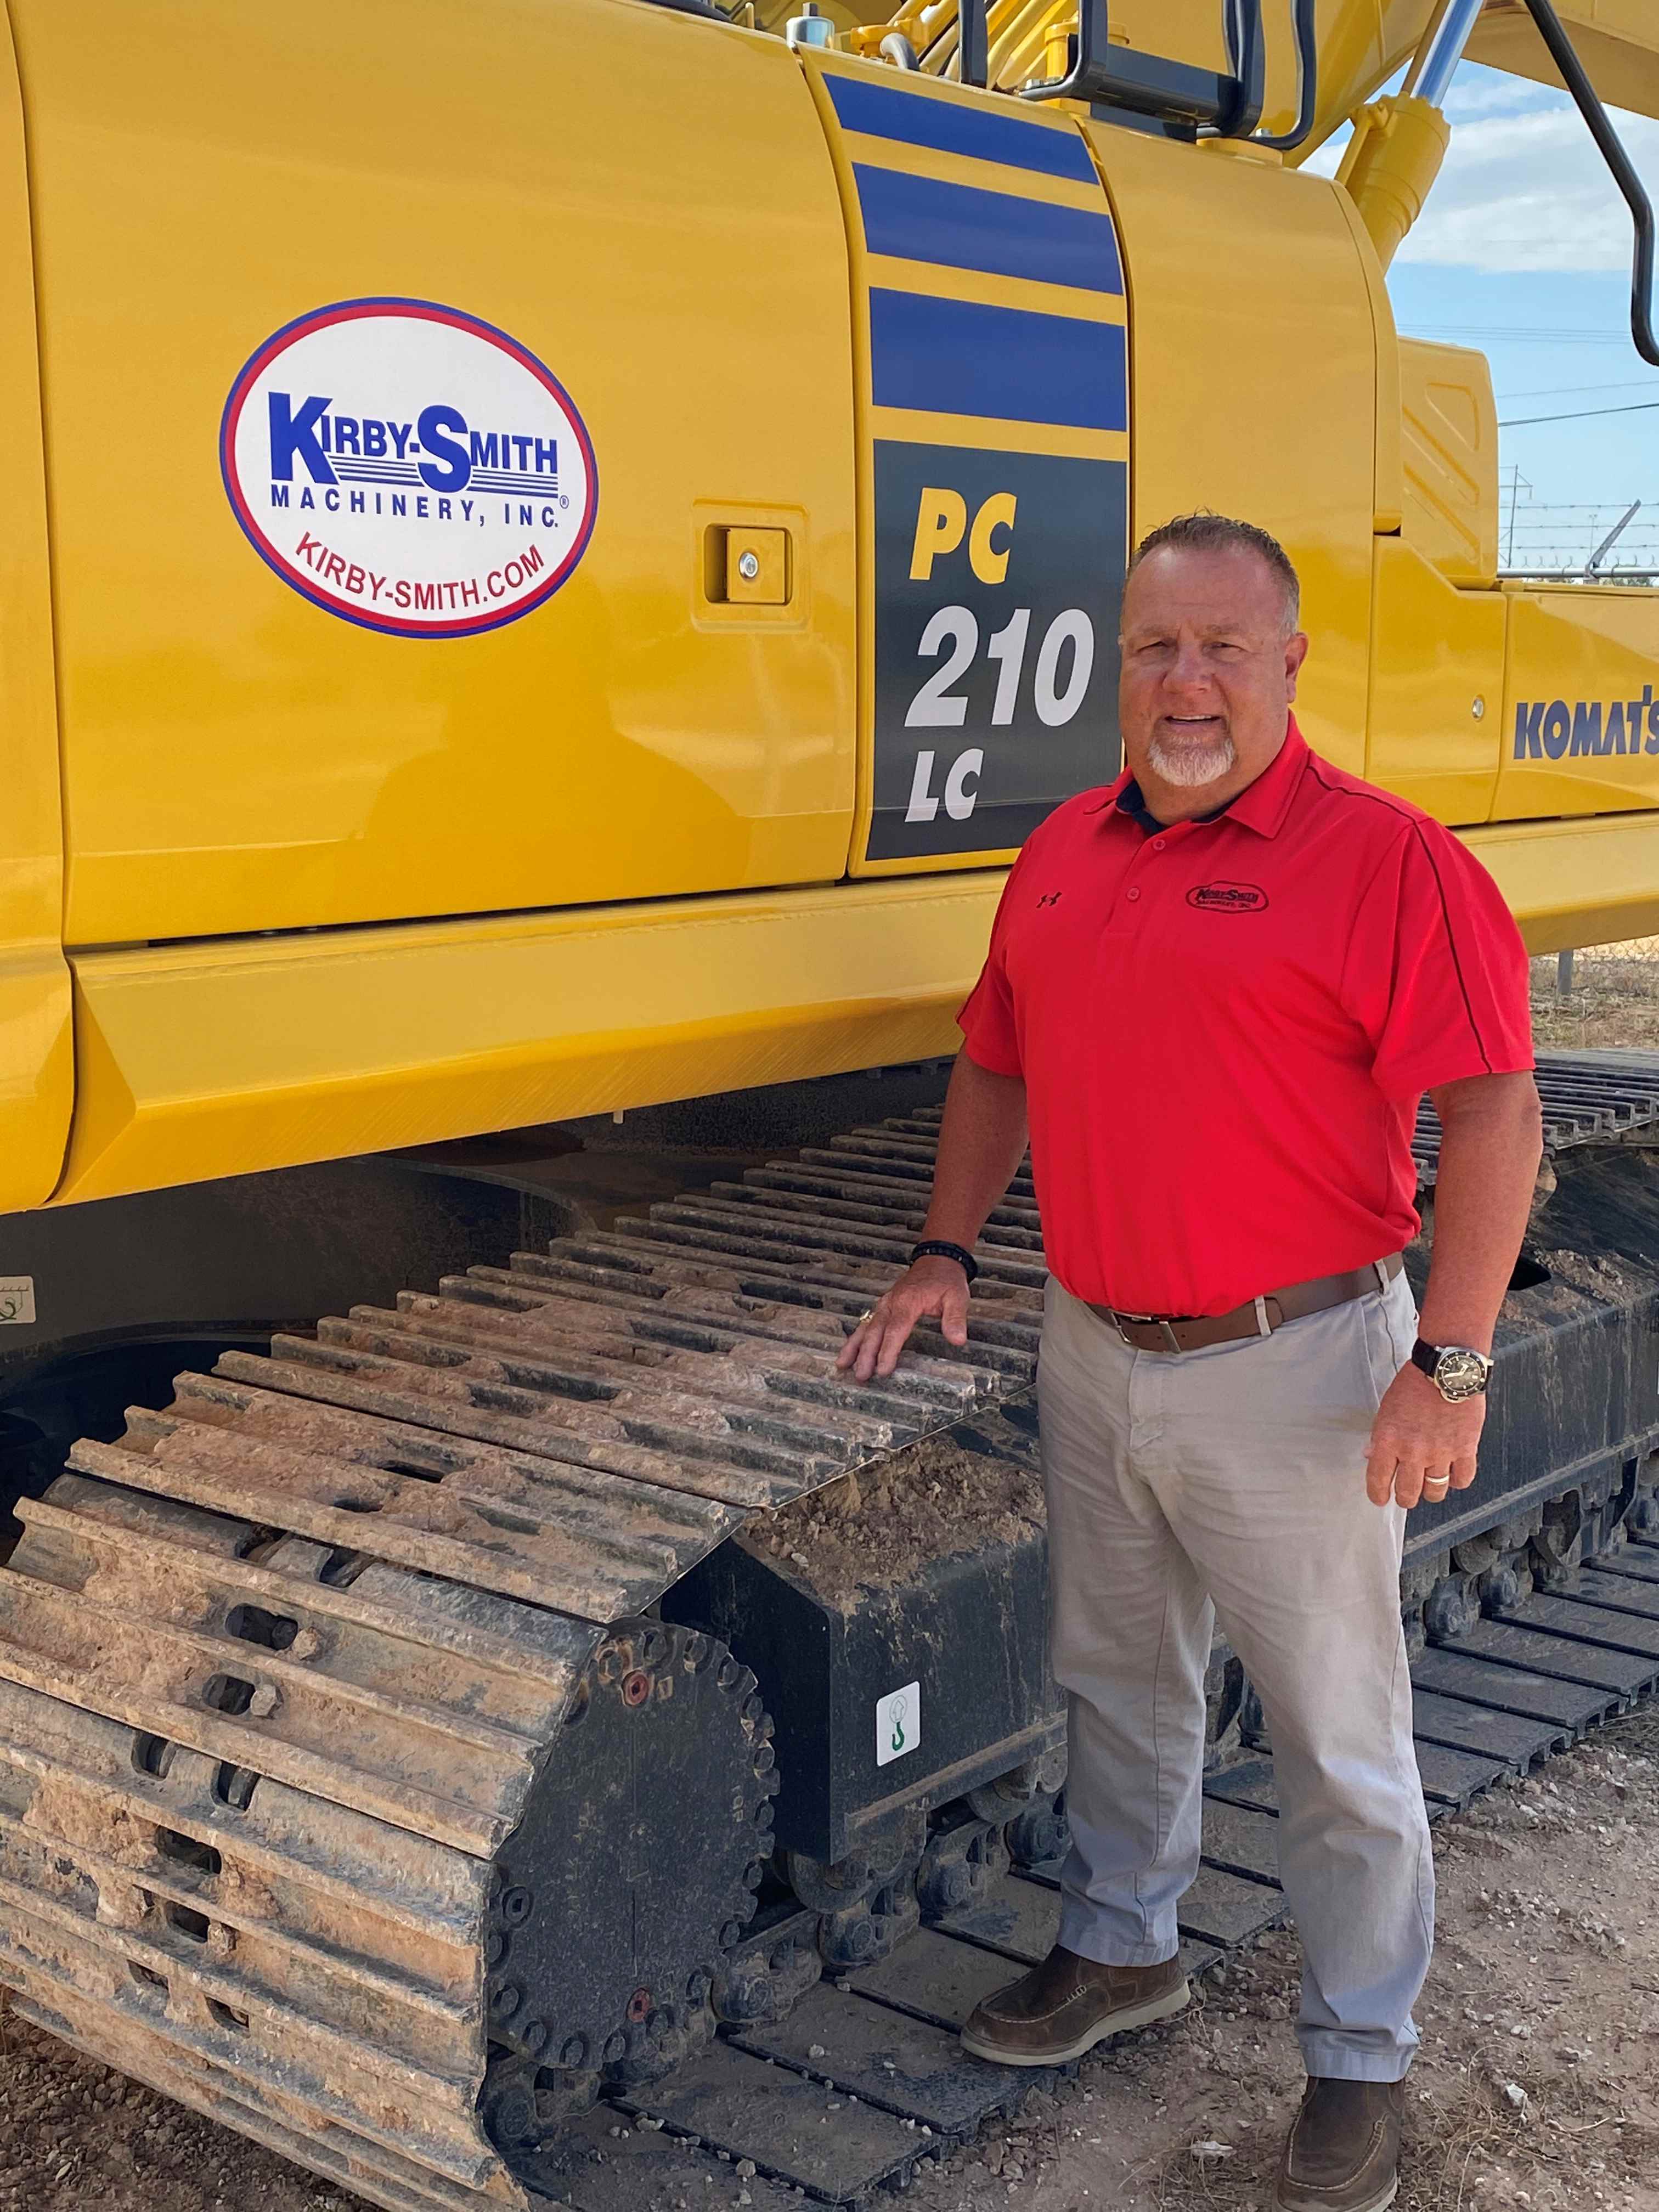 Rick Derr joins Kirby-Smith's experienced Used Equipment Team